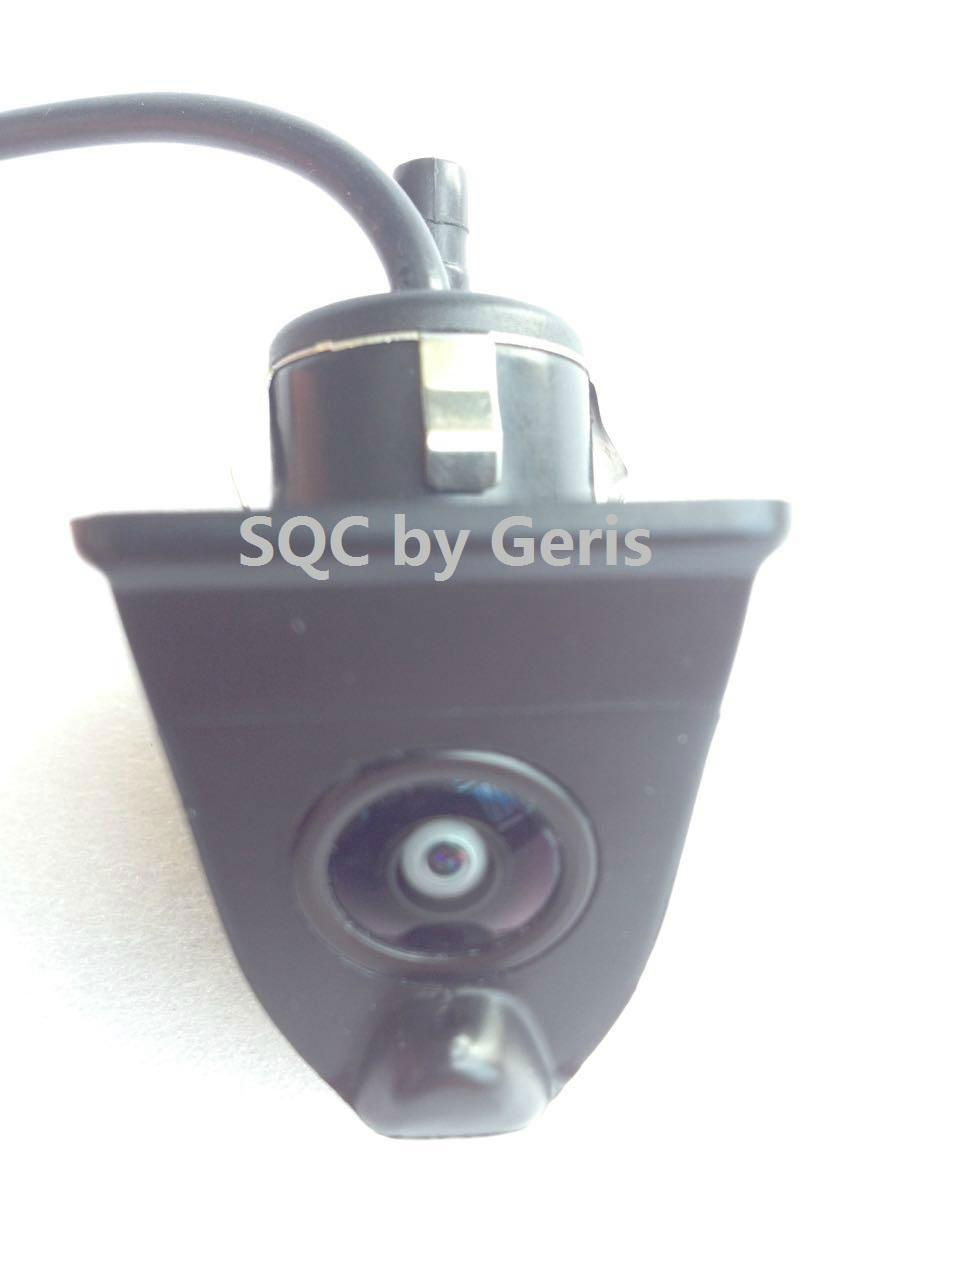 Upsight view and downview car camera